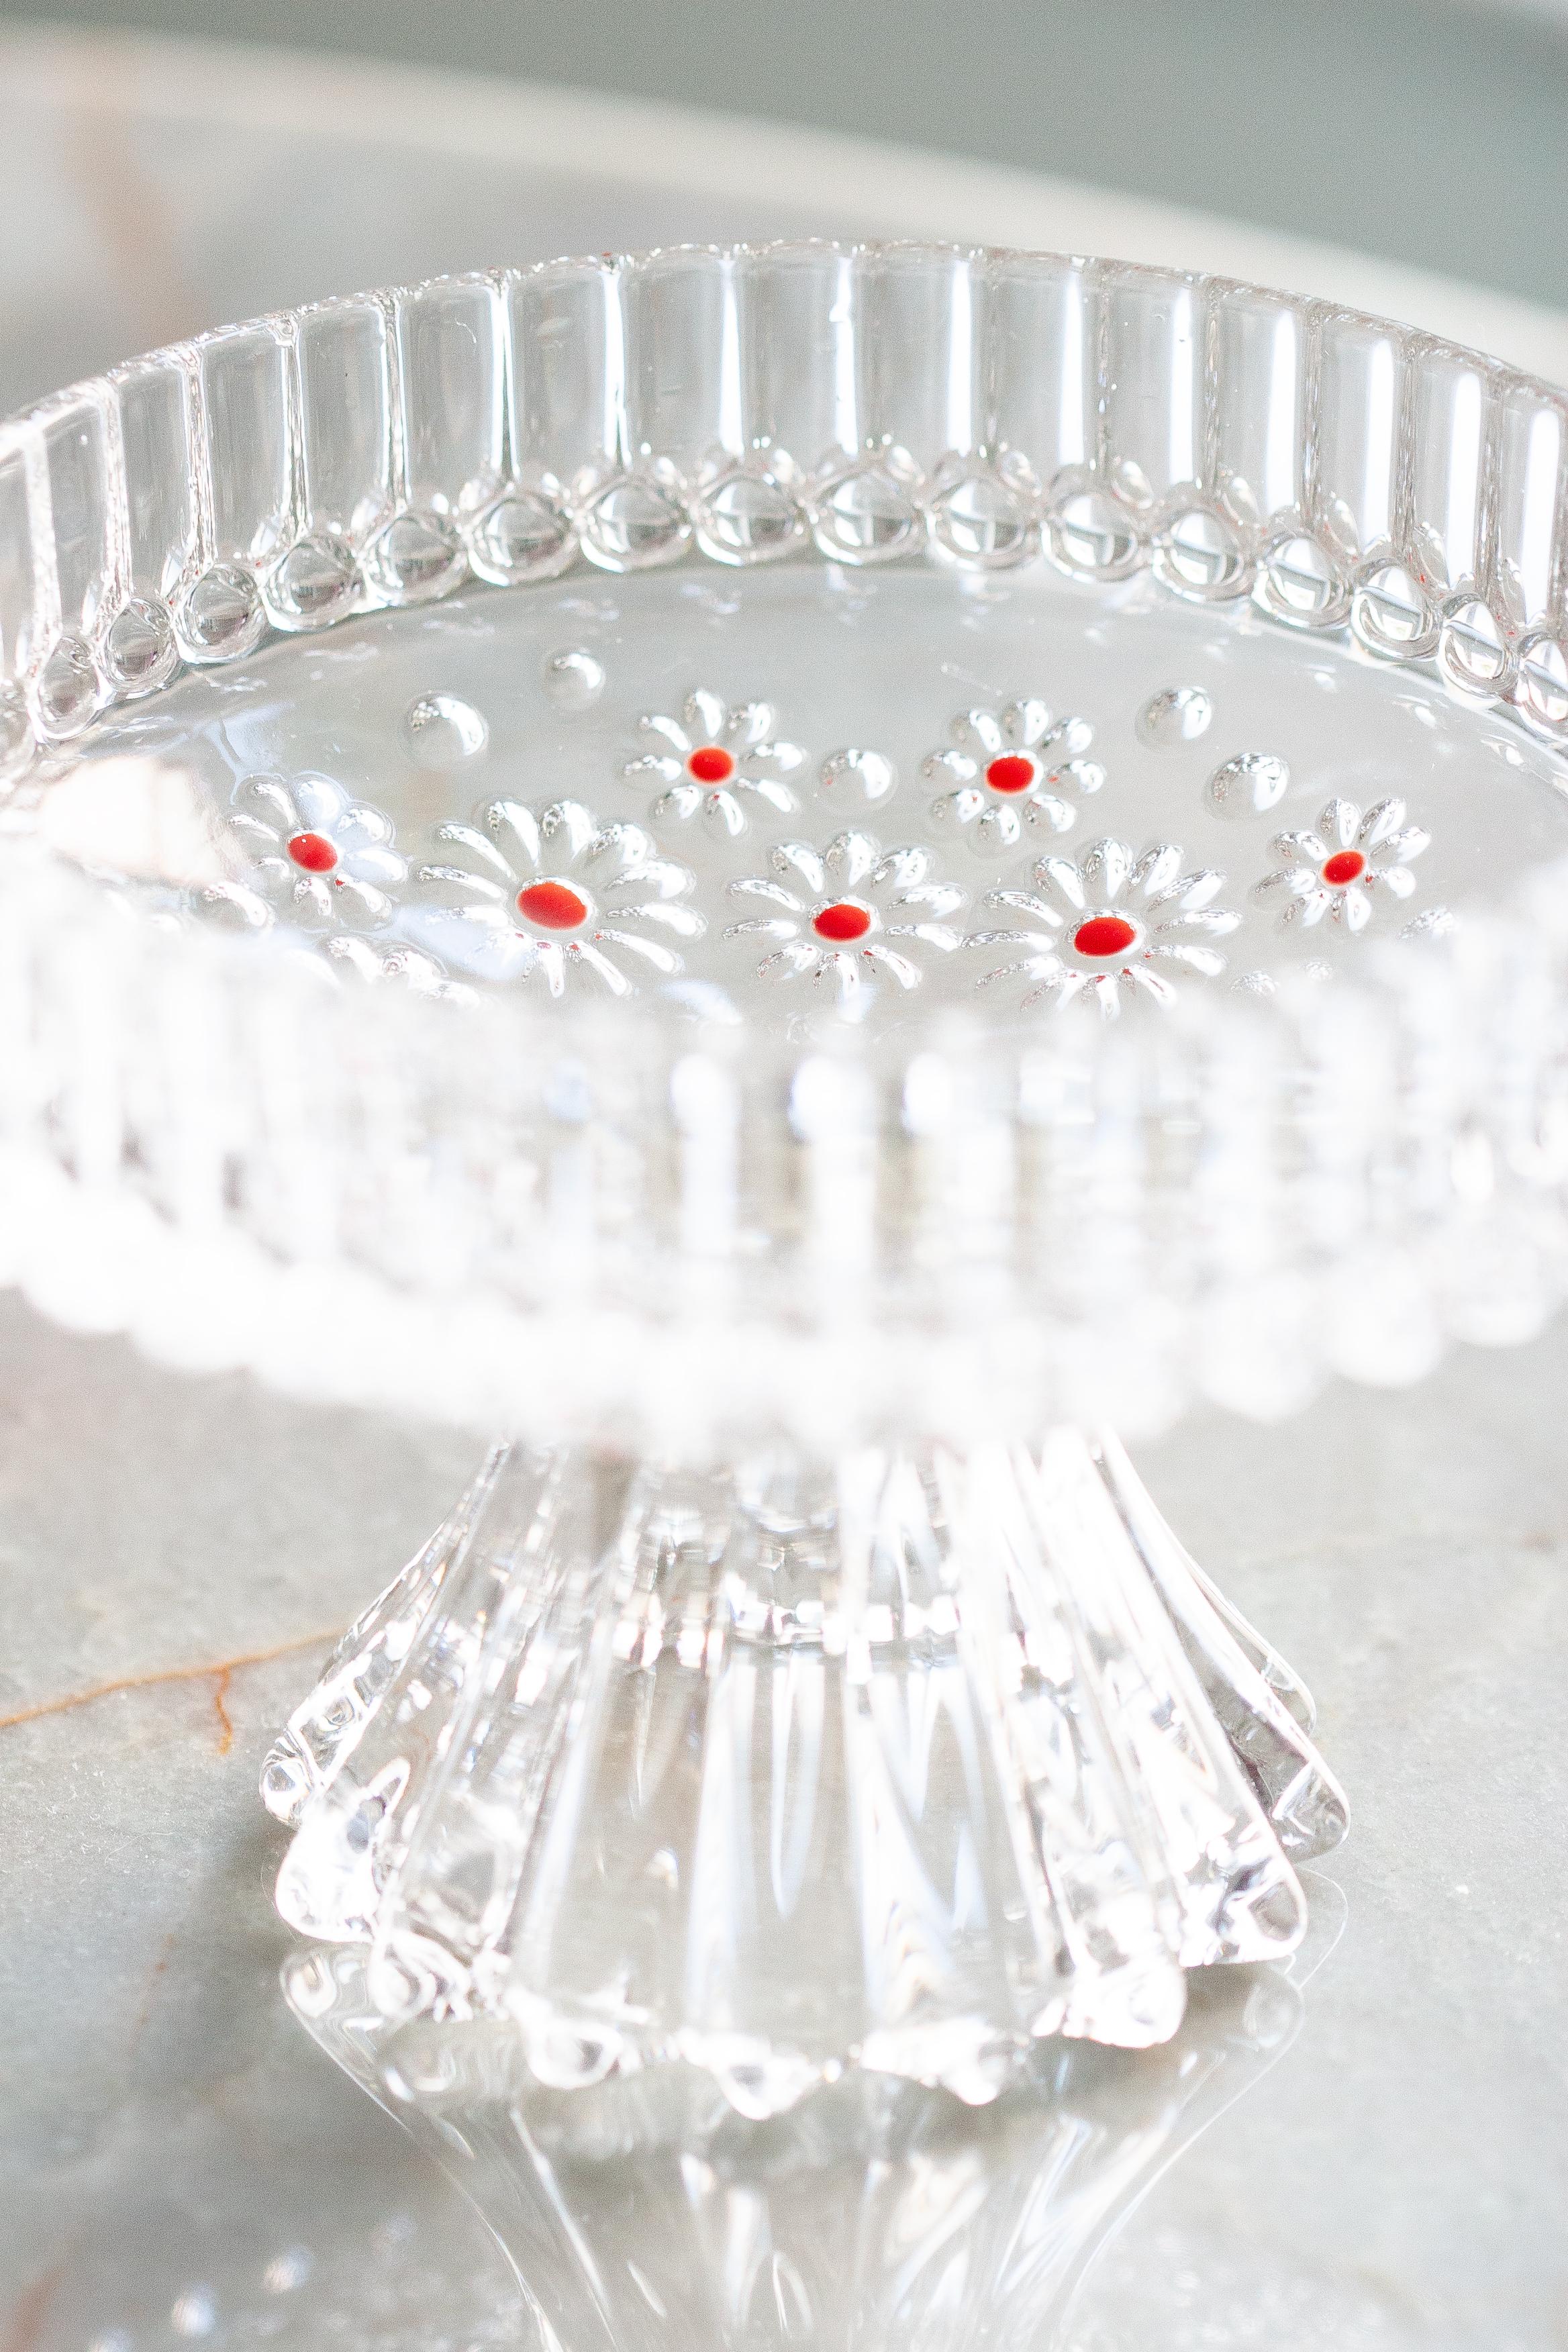 Vintage Transparent Decorative Crystal Glass Plate, Italy, 1960s For Sale 1